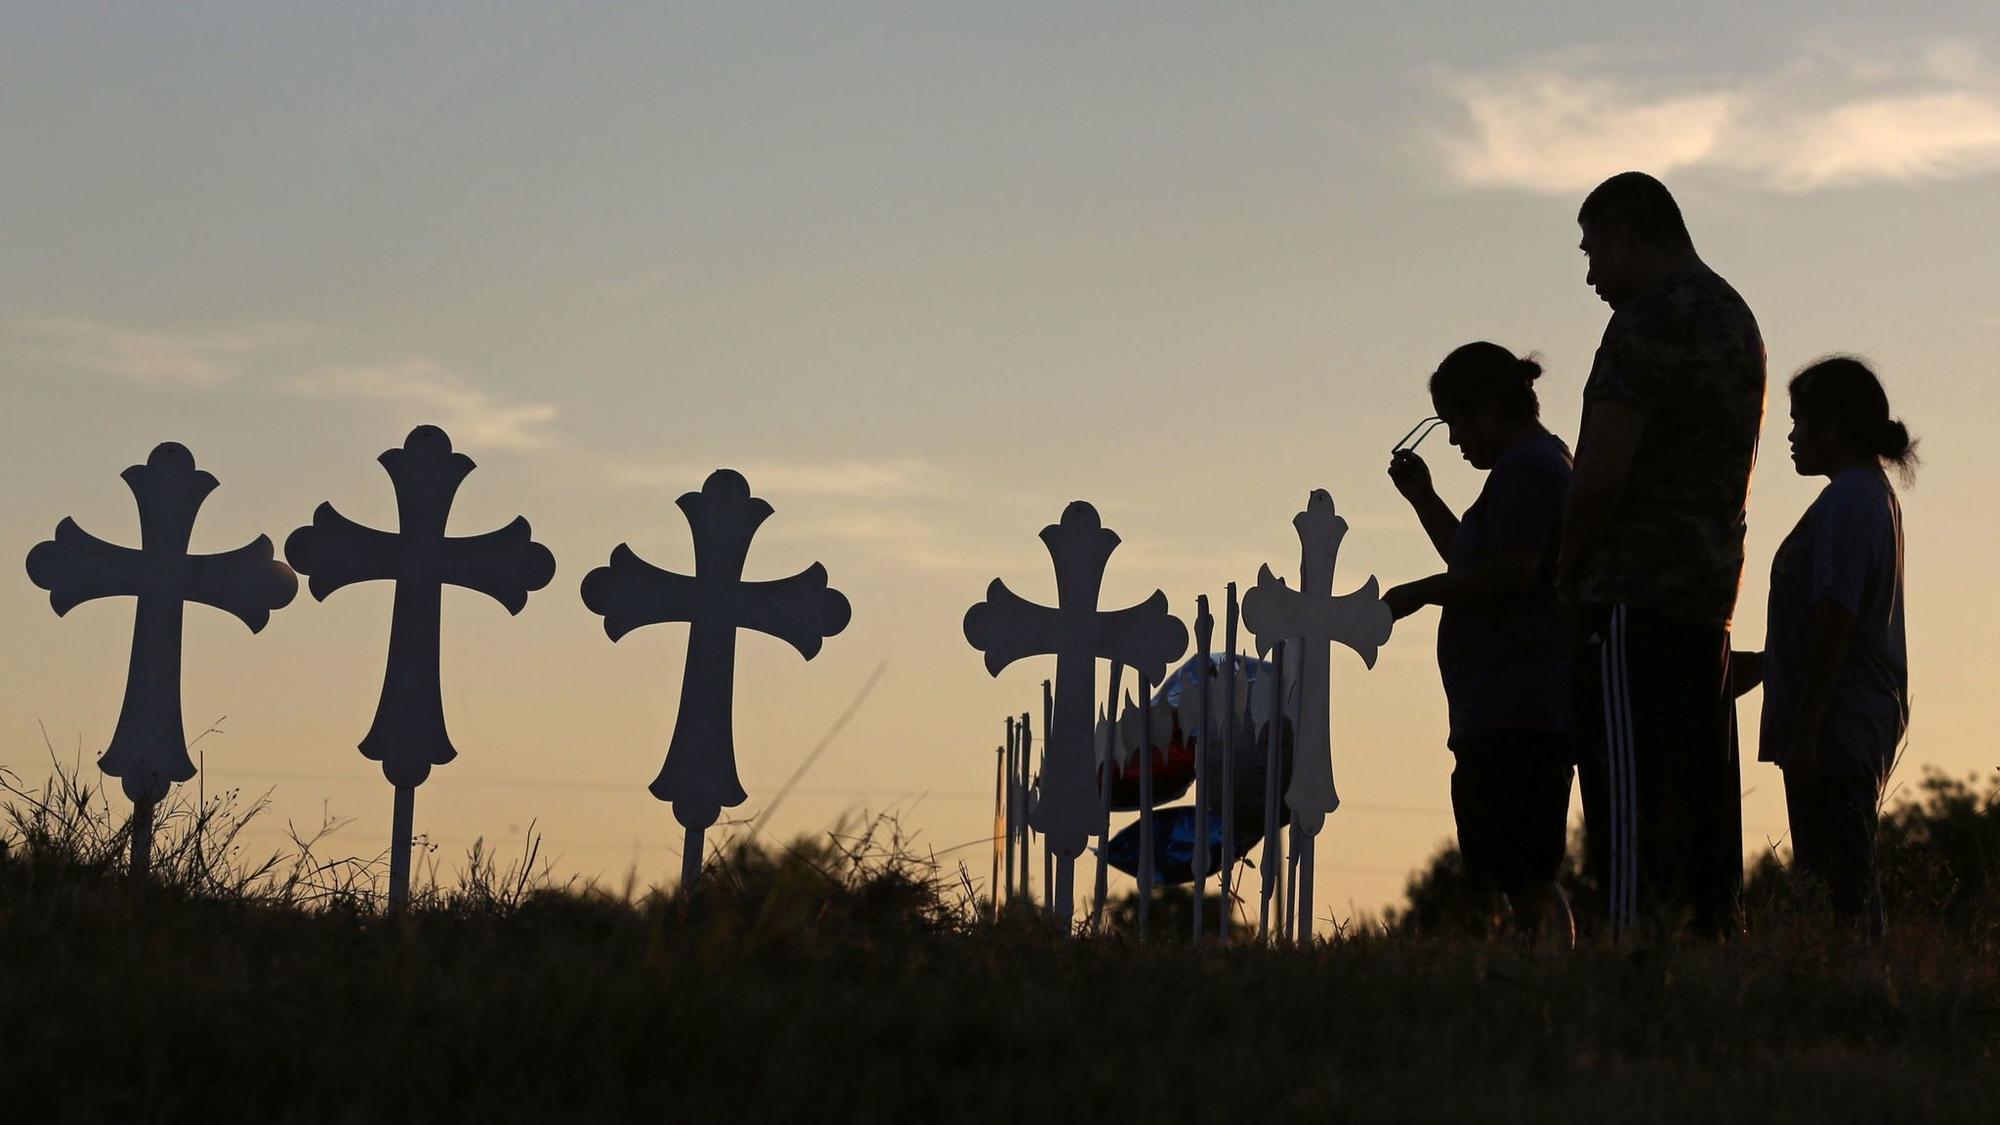 Authorities identify the victims of the Texas church shooting - LA Times